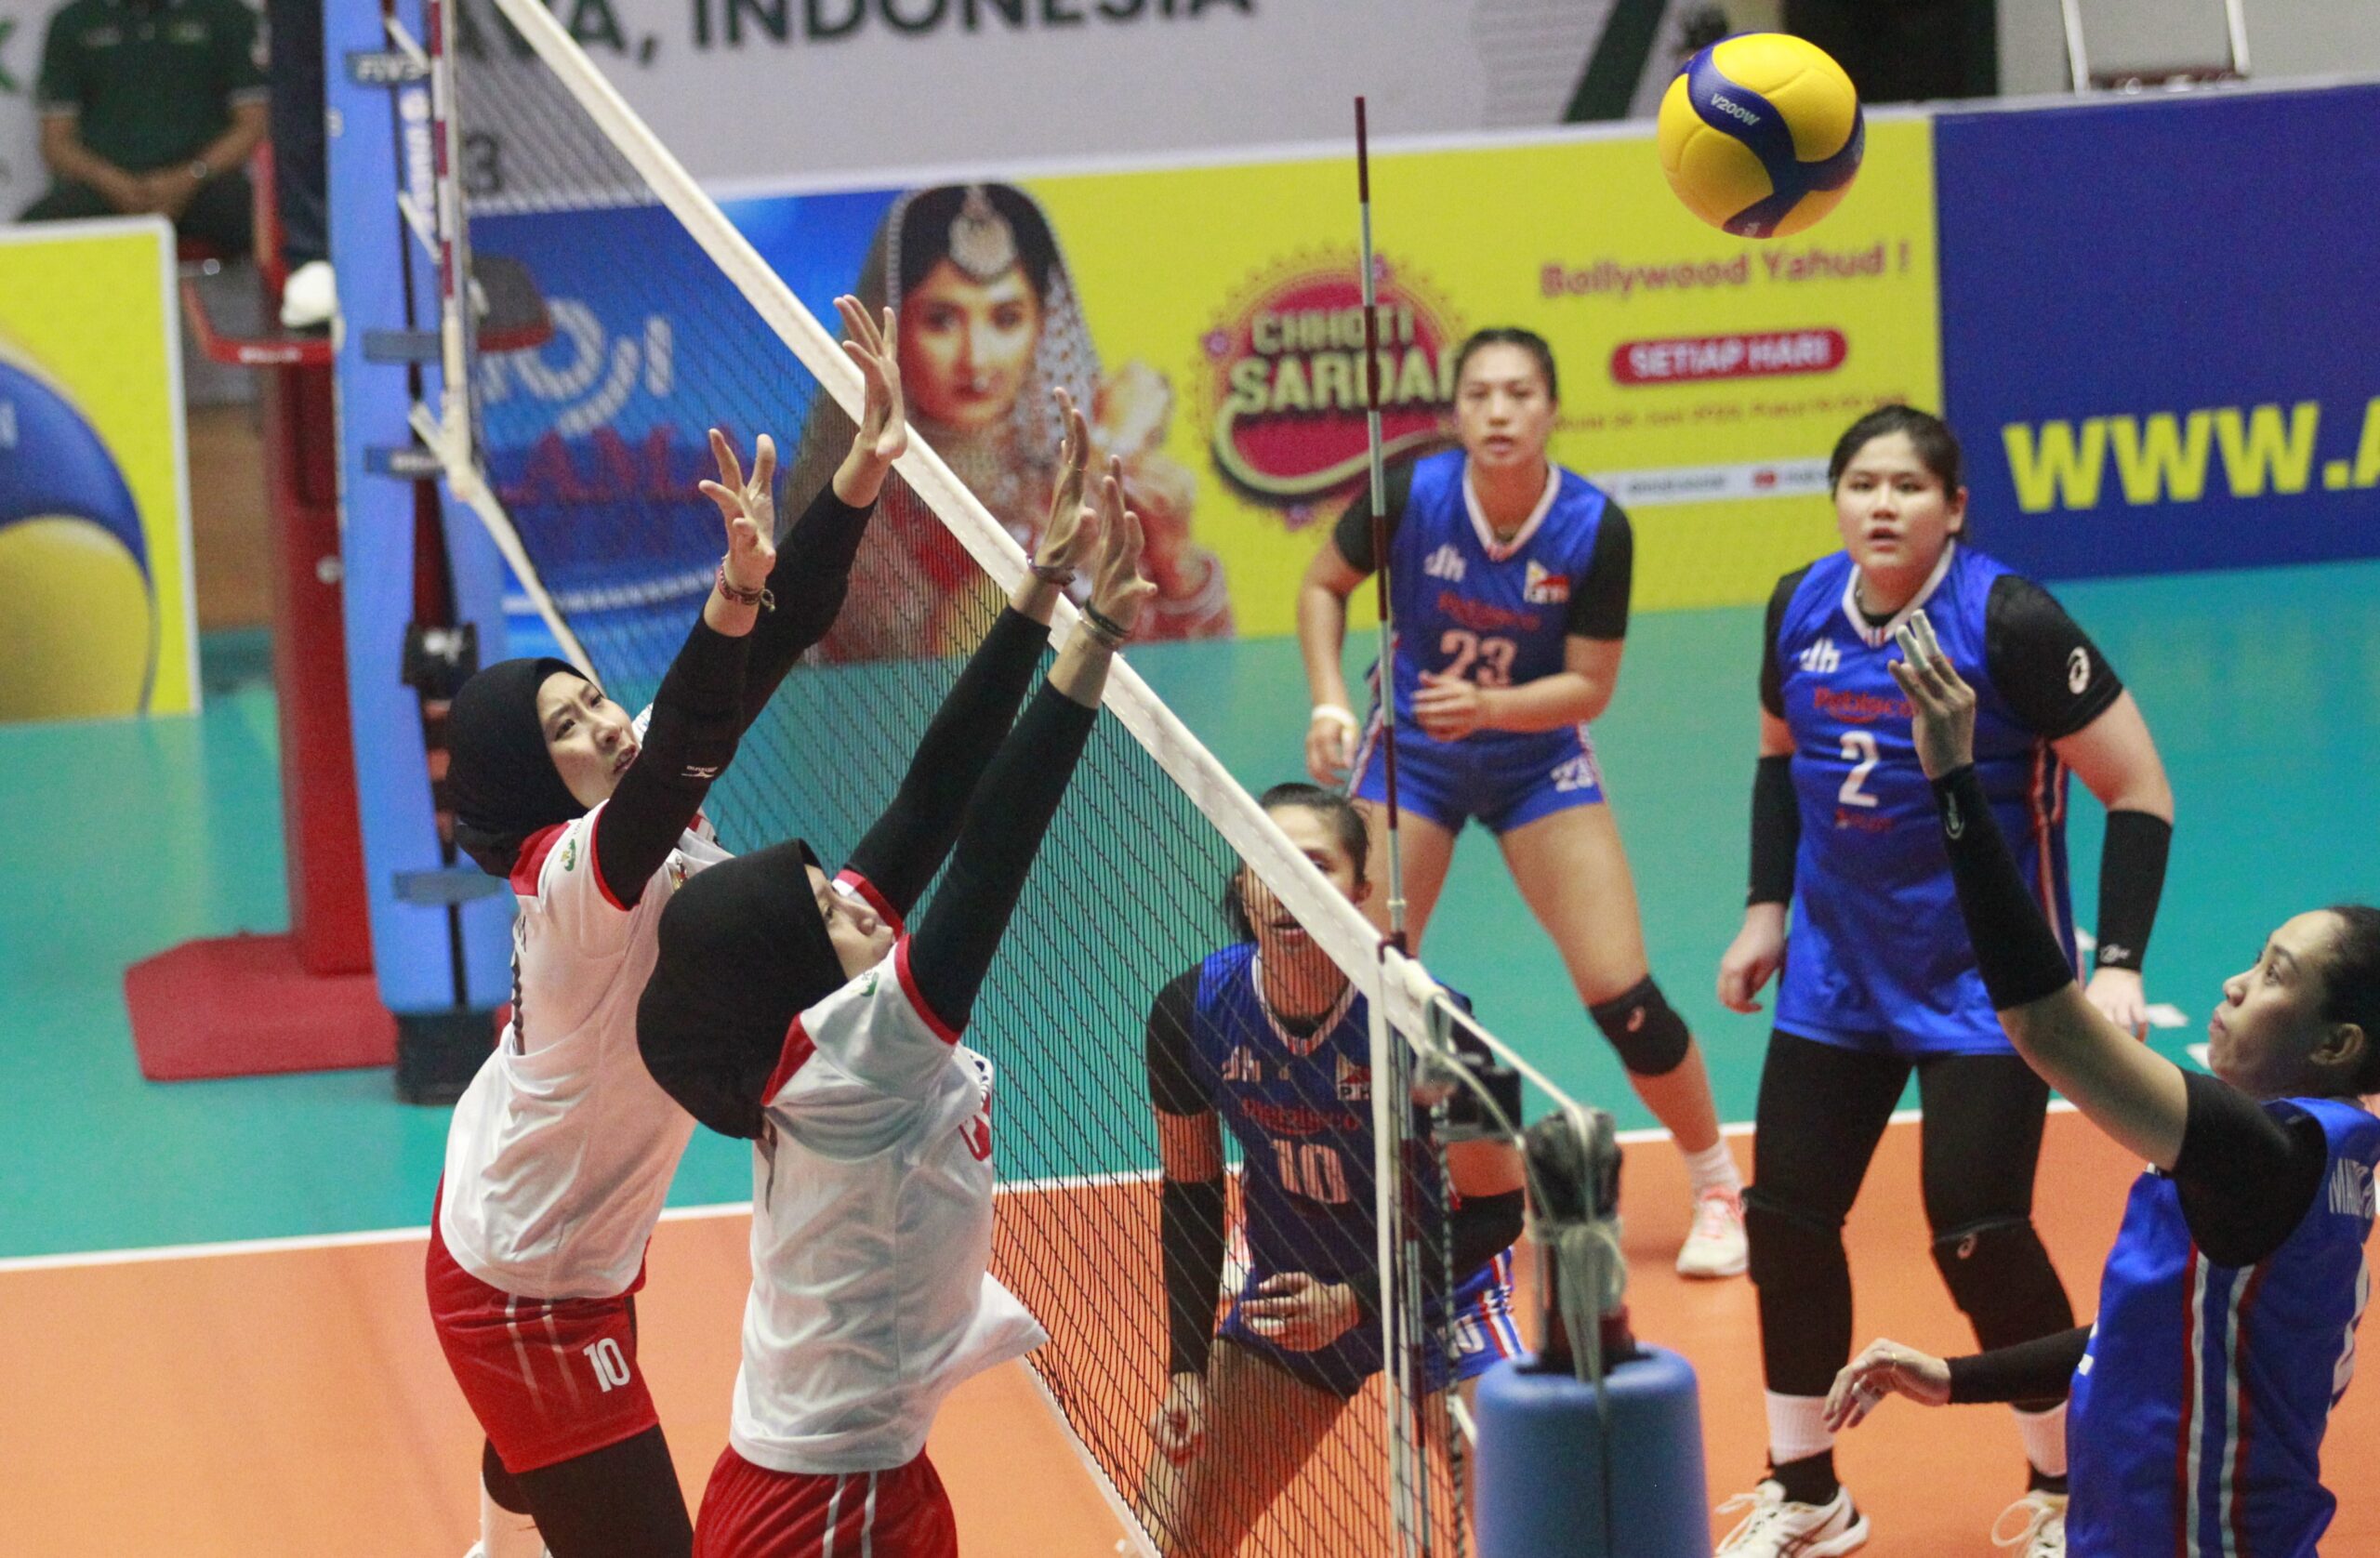 Philippines falls to Indonesia in AVC Challenge Cup Inquirer Sports